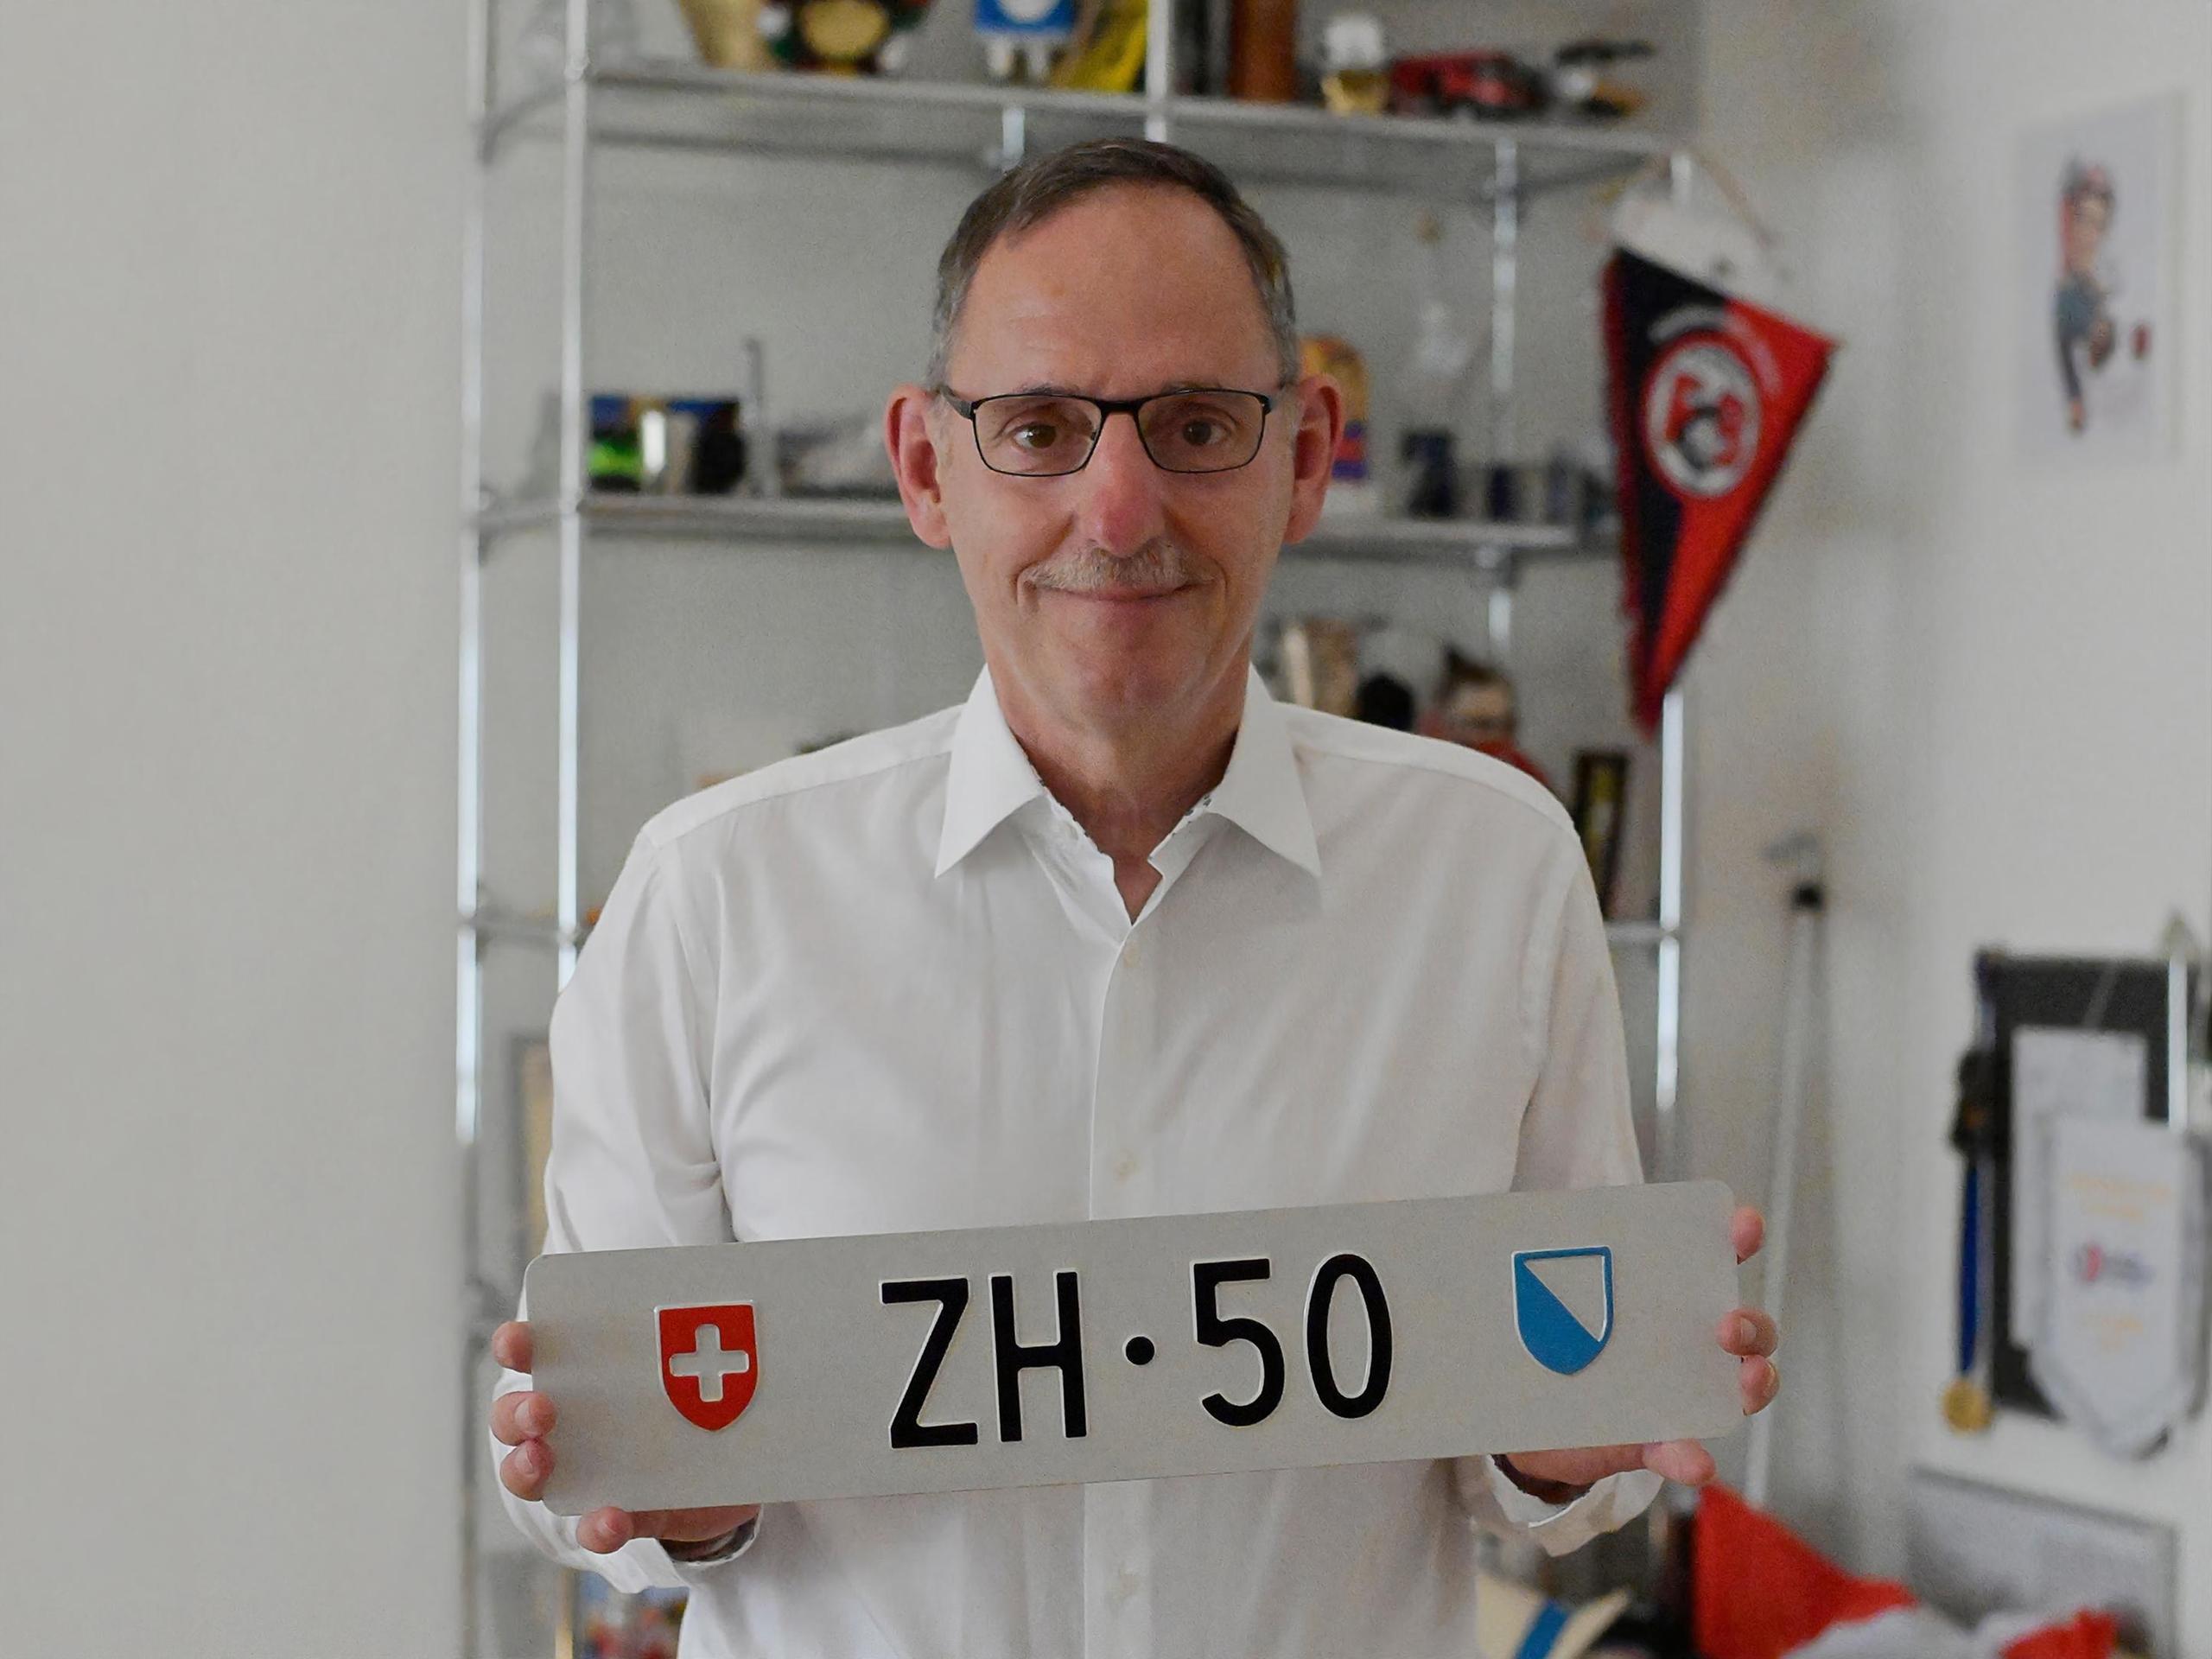 The number plate ZH 50 has a new owner.